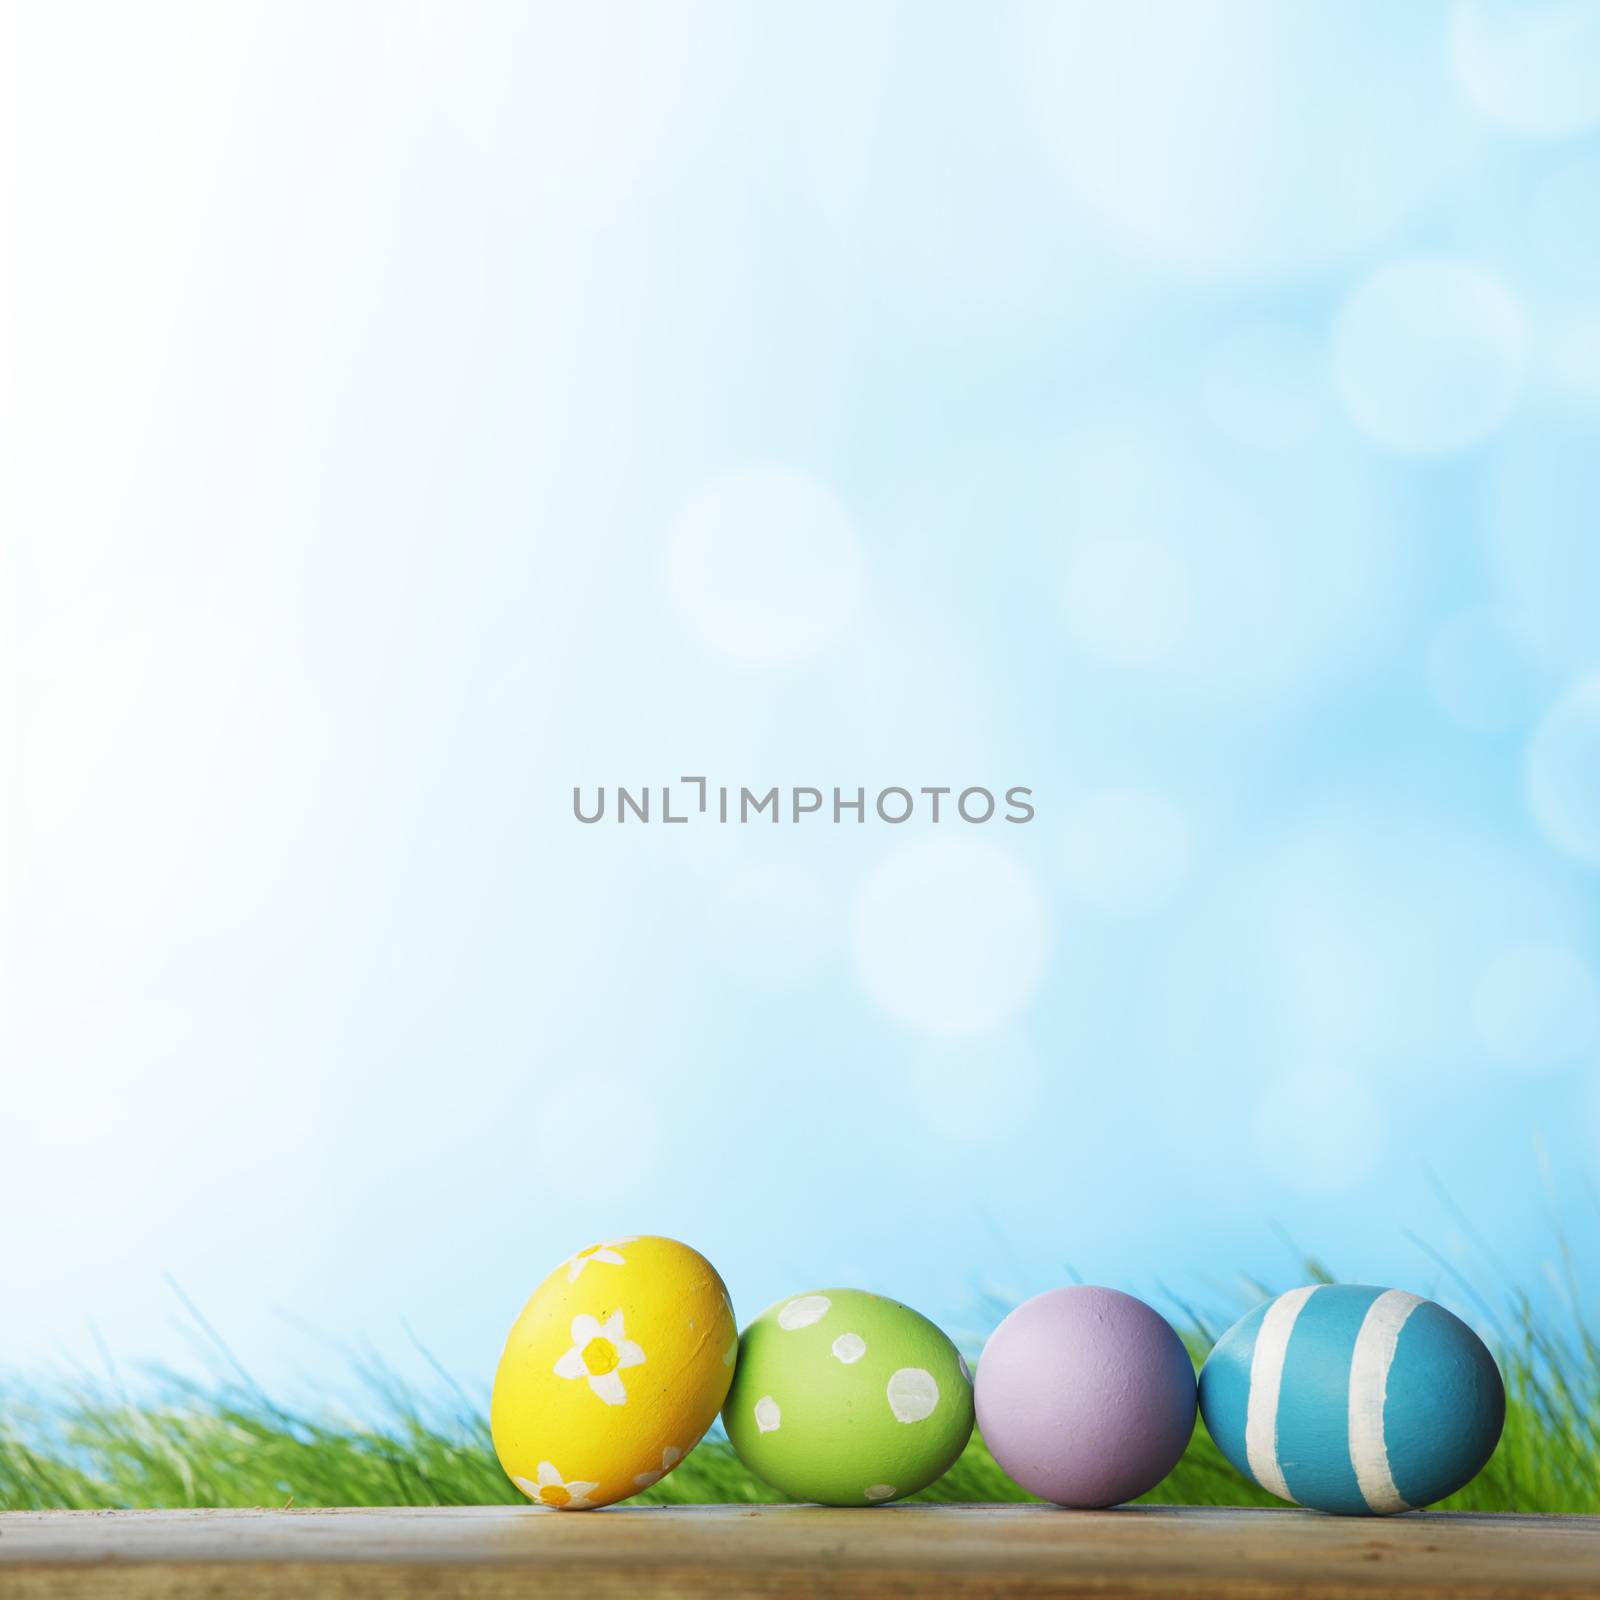 Row of Easter eggs on Fresh Green Grass and blue sky background